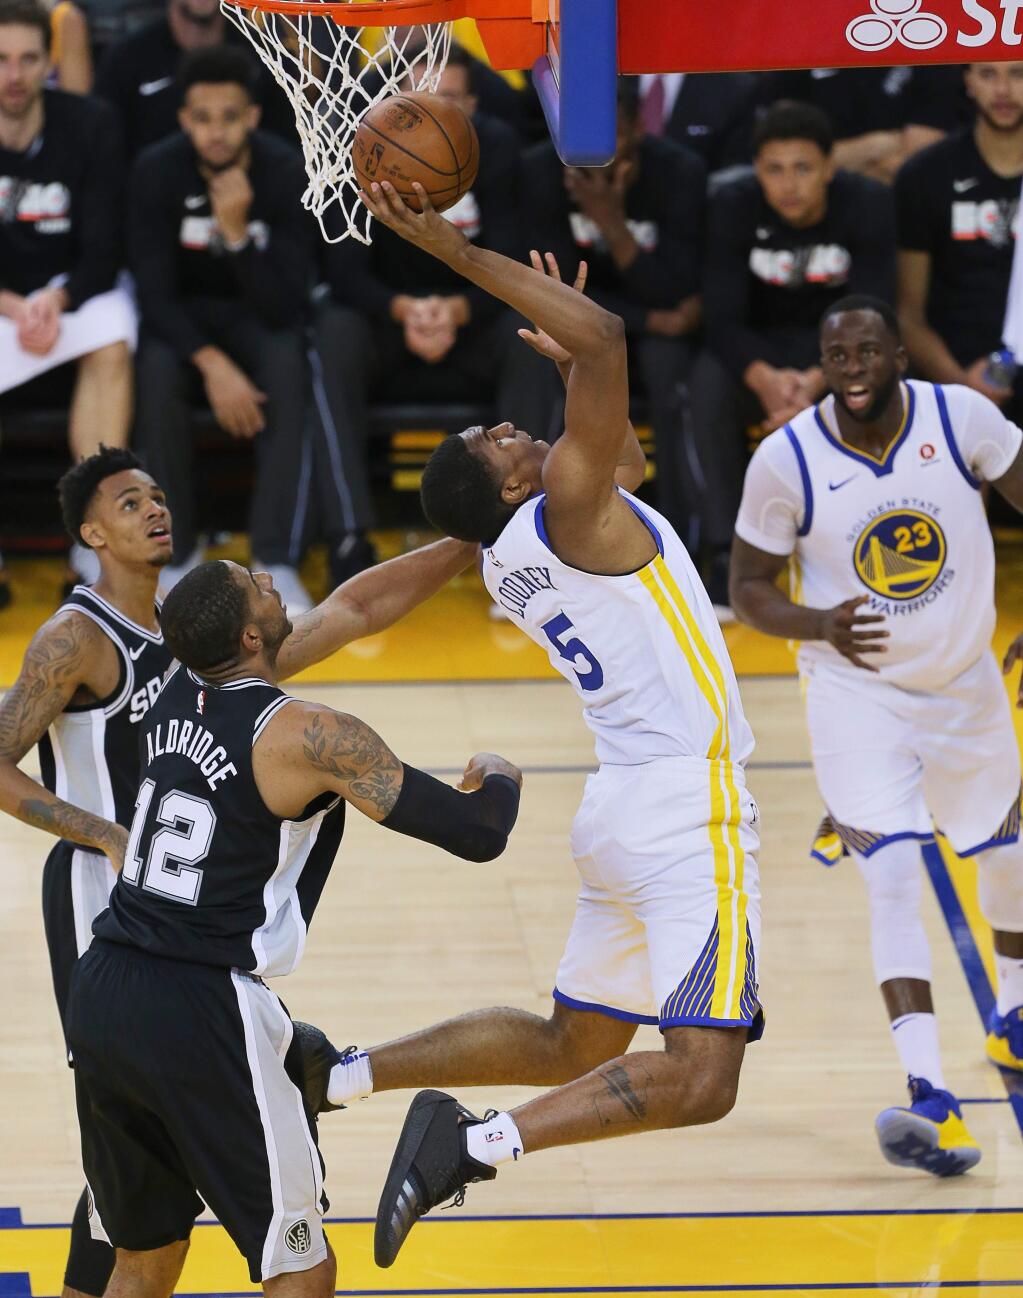 Golden State Warriors forward Kevon Looney gets the shot after the foul by San Antonio Spurs center LaMarcus Aldridge, during their game in Oakland on Tuesday, April 24, 2018. (Christopher Chung/ The Press Democrat)